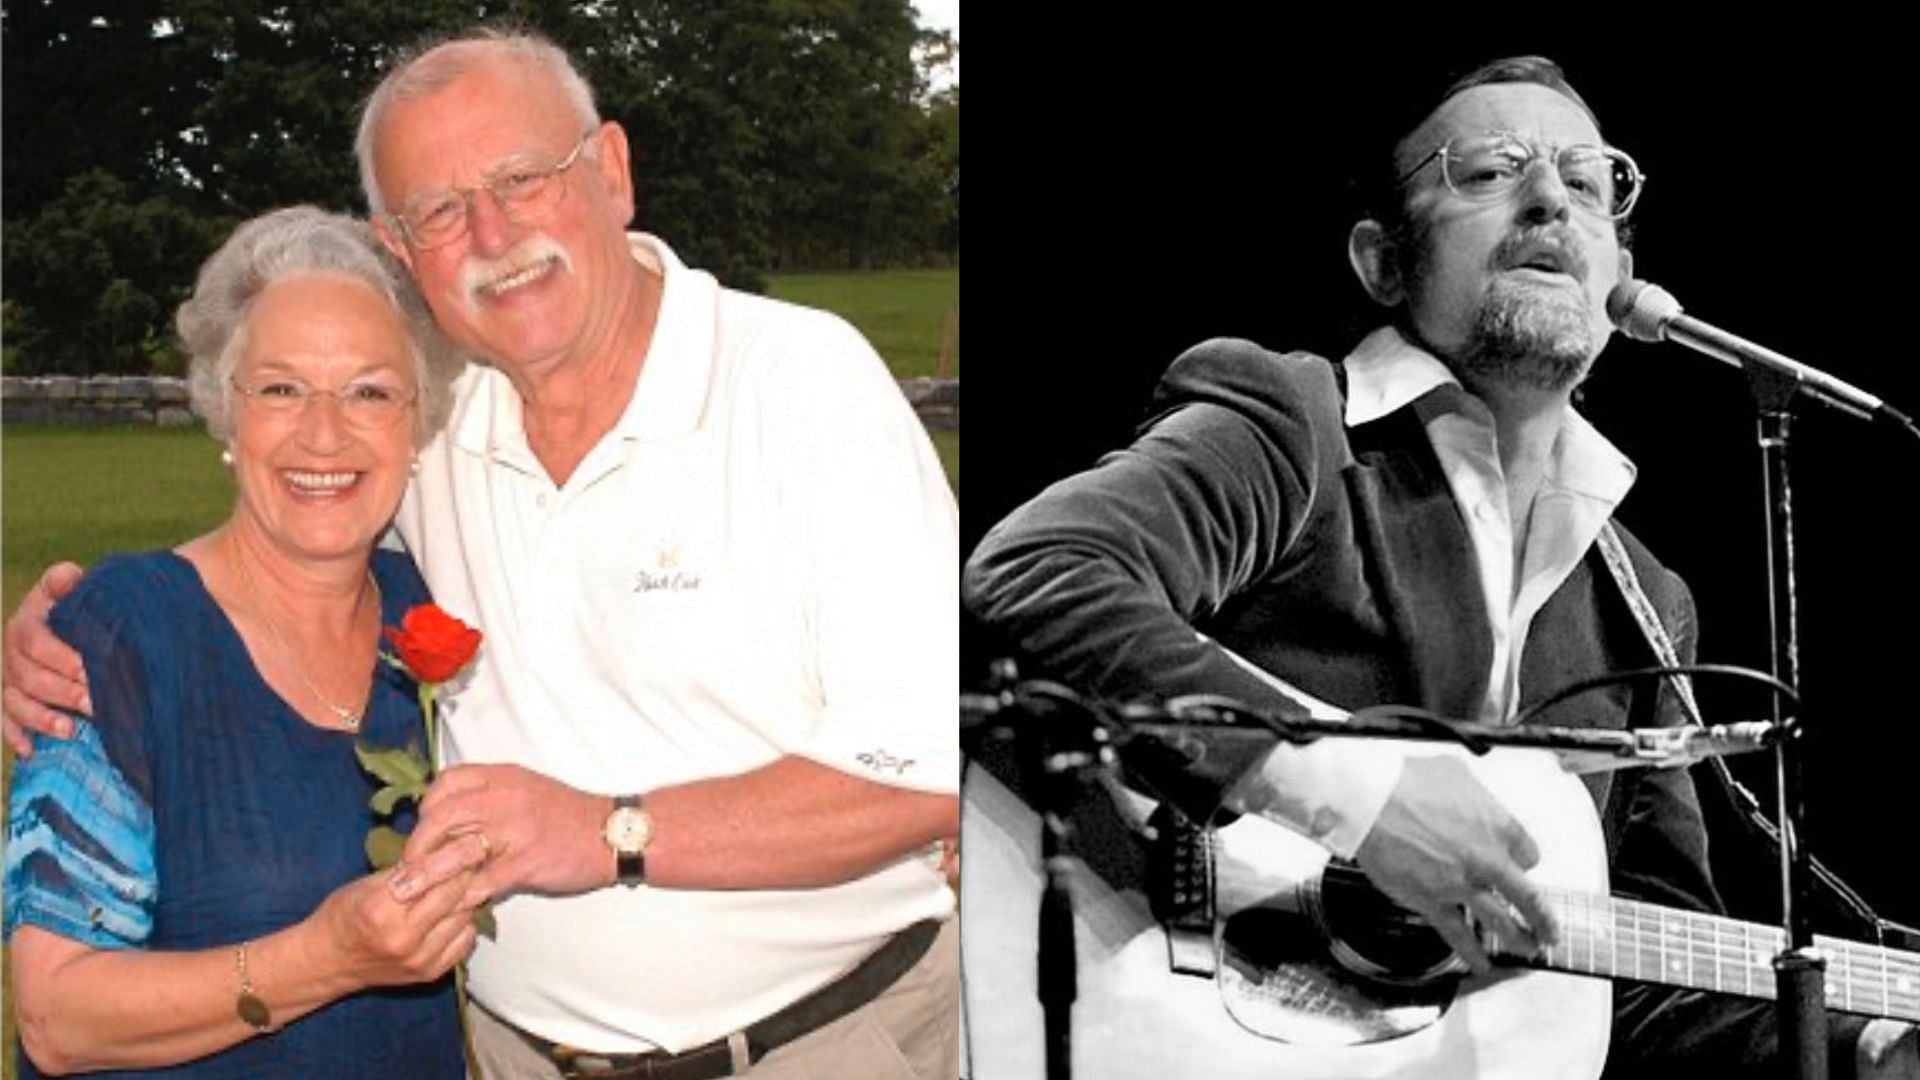 Roger Whittaker has died at the age of 87. (Images via www.rogerwhittaker.com)